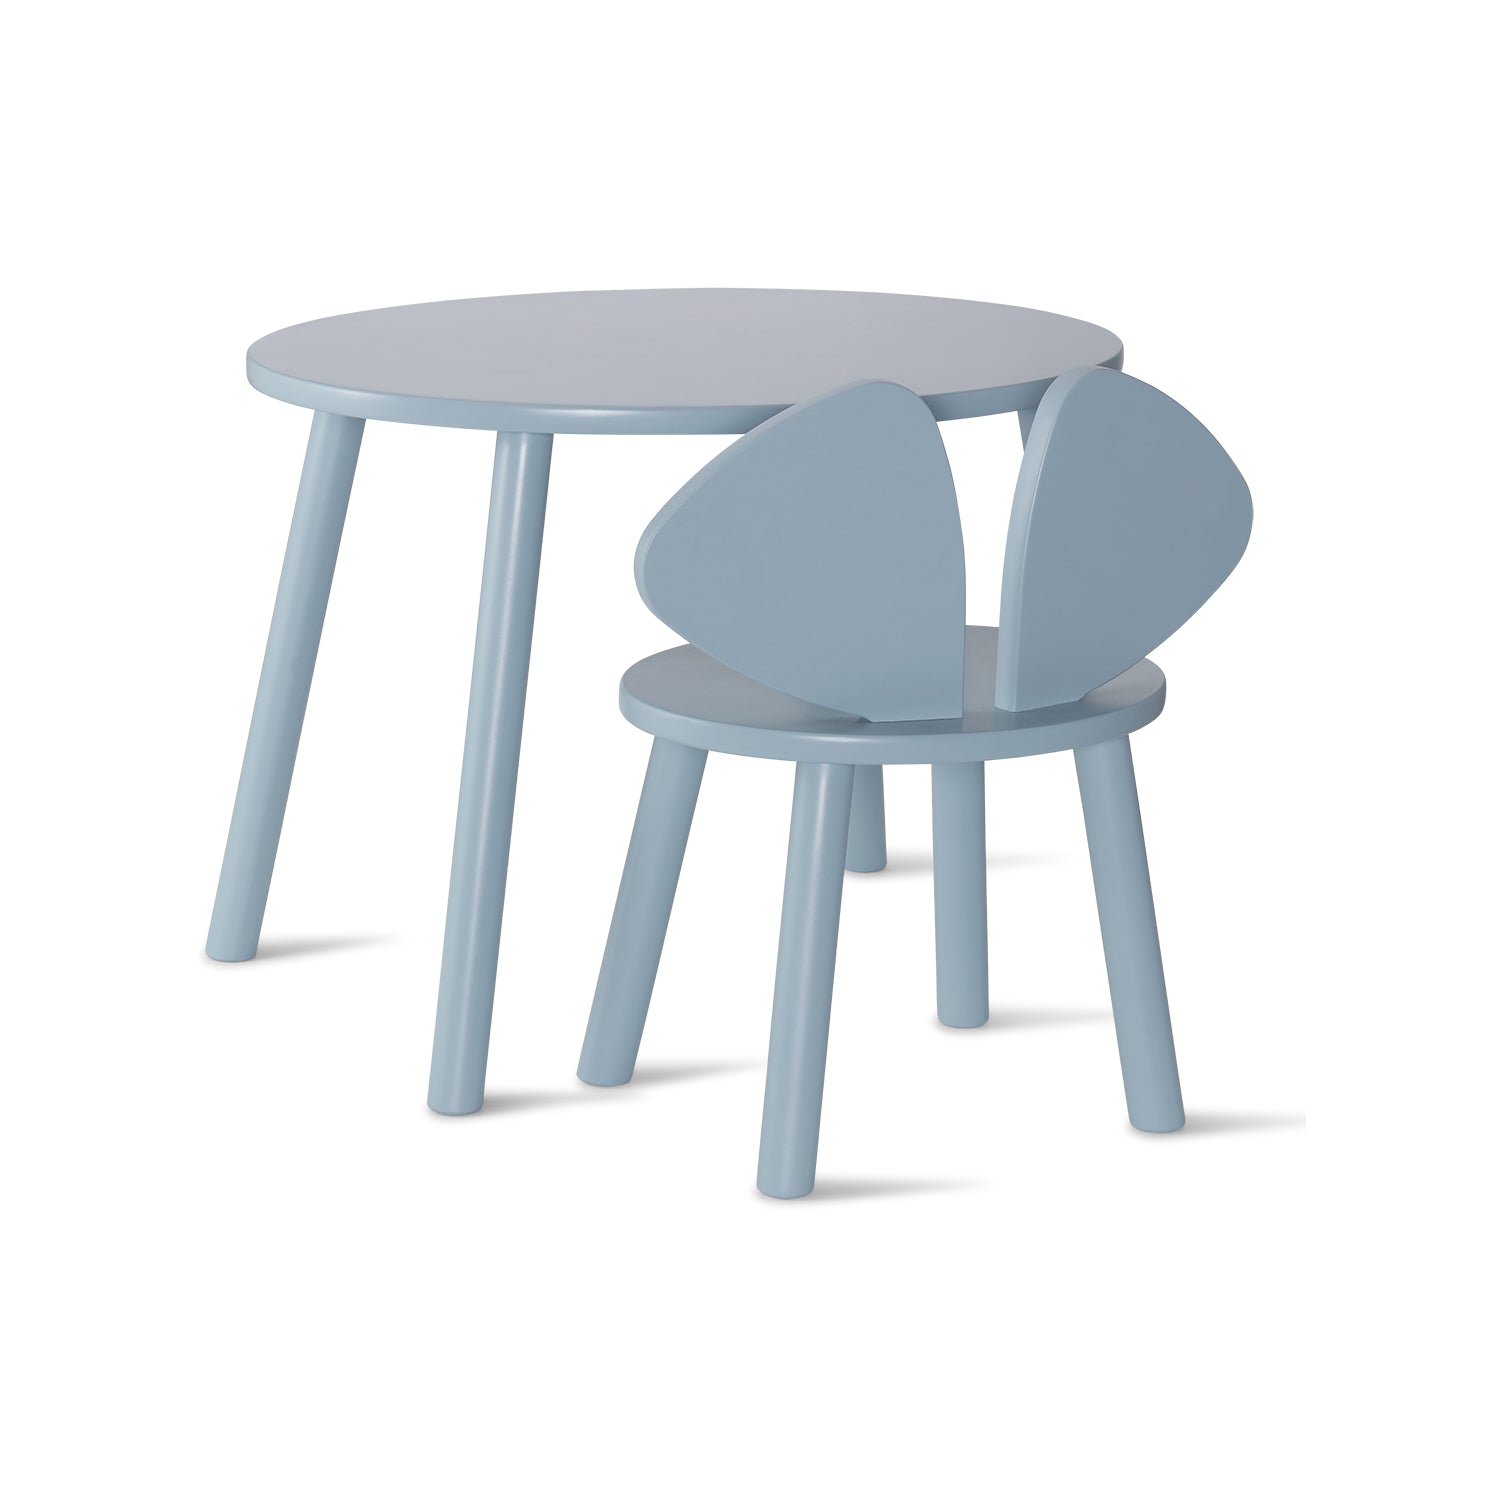 Nofred mouse and table set in light blue